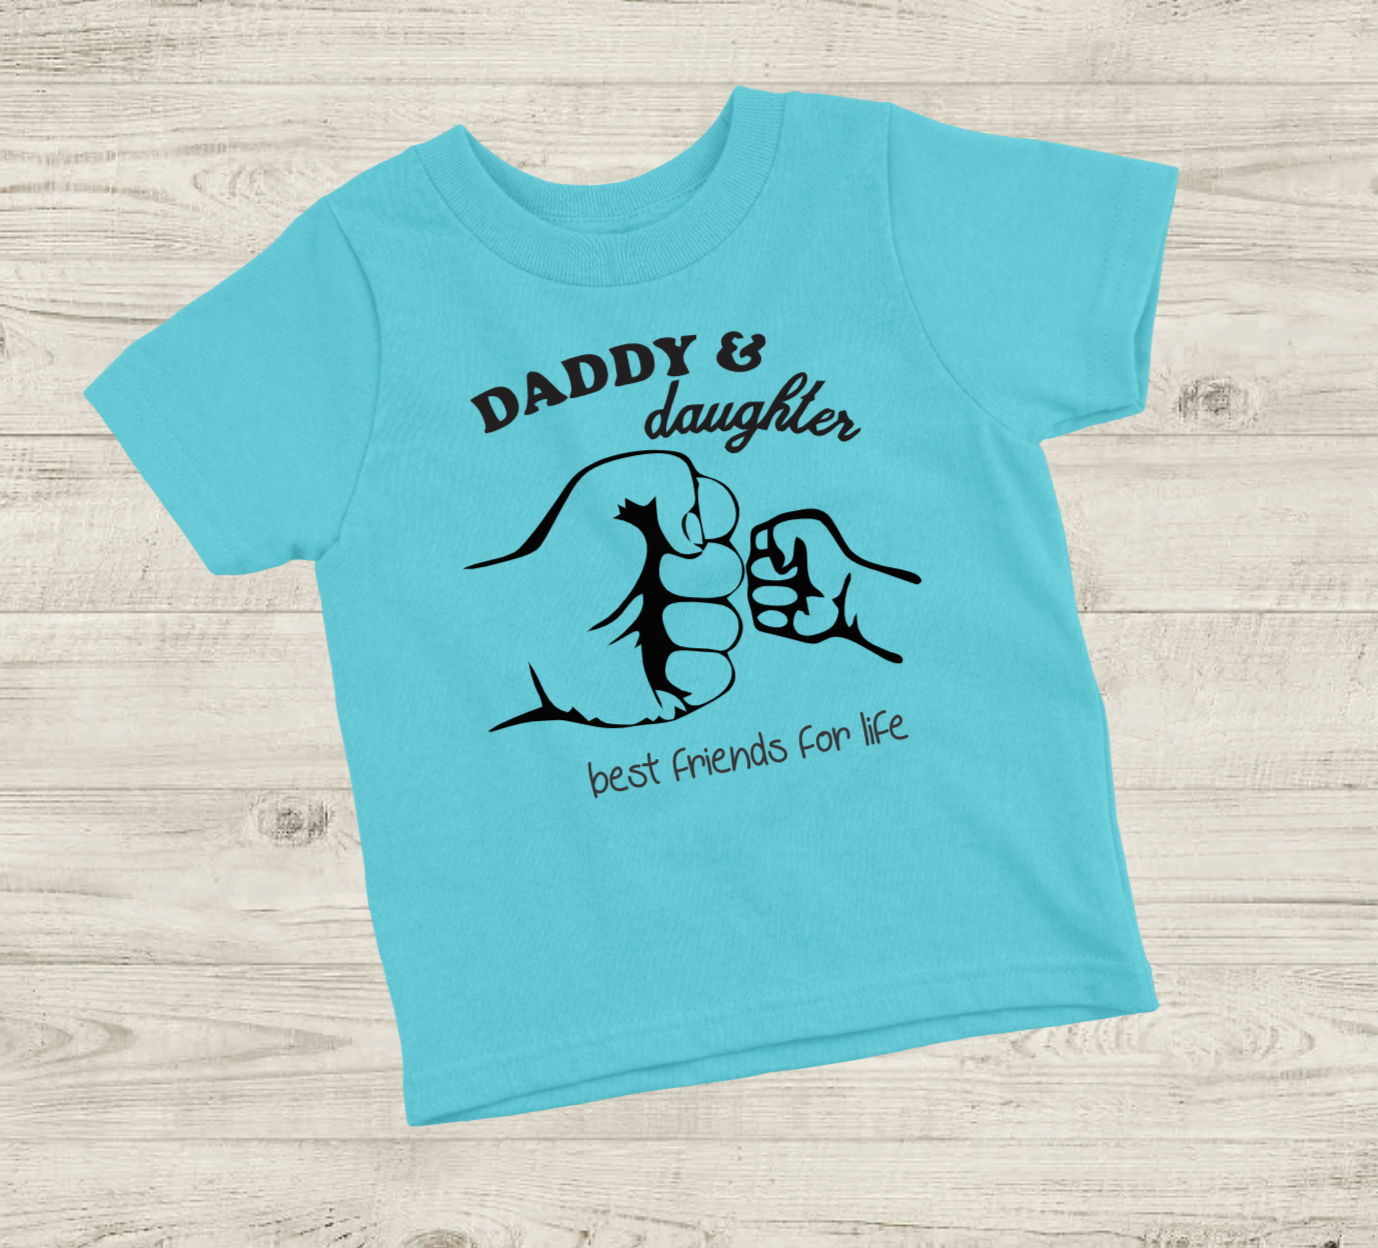 Daddy & Daughter Best Friends for Life Shirt